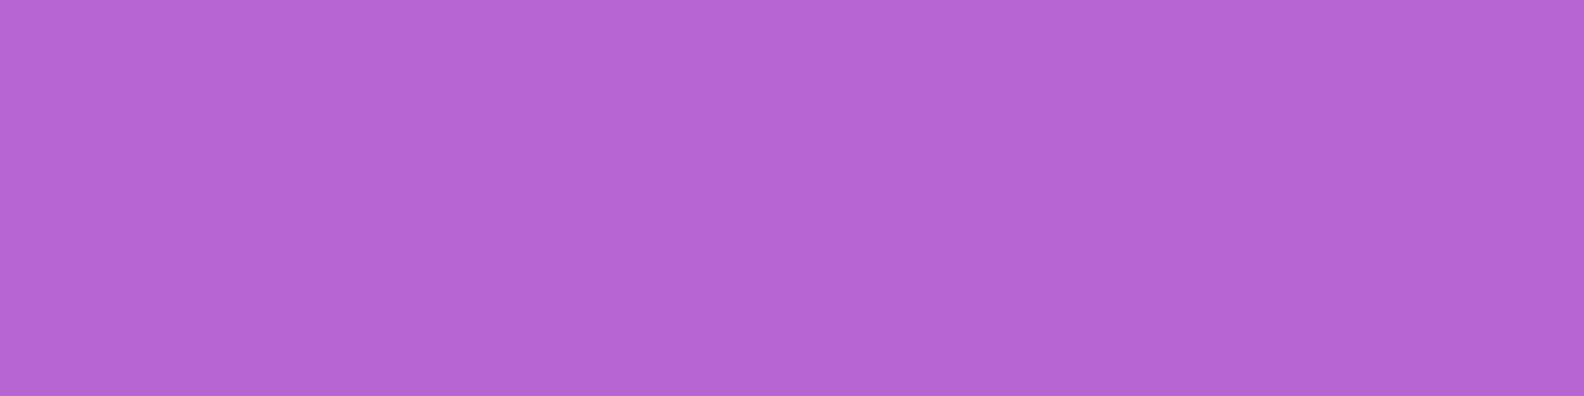 1584x396 Rich Lilac Solid Color Background